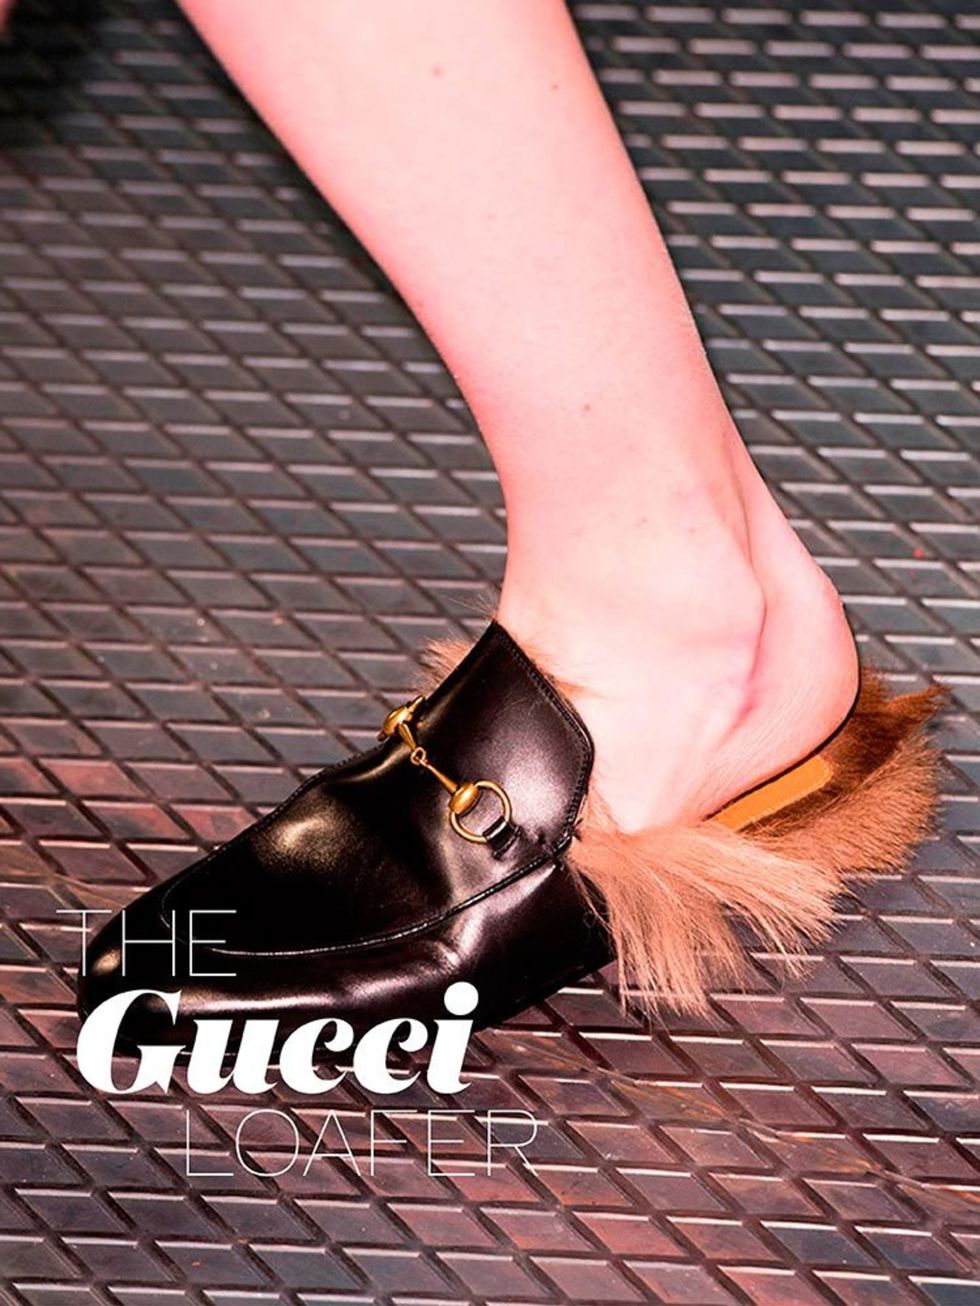 <p>The <a href="http://www.elleuk.com/fashion/news/gucci-aw-2015-catwalk-show-review-milan-fashion-week" target="_blank">Gucci</a> loafer &ndash; Not the clog or the furry dog one. This sleek, flat mule sprouting fur is the one we want from Gucci.&nbsp;</